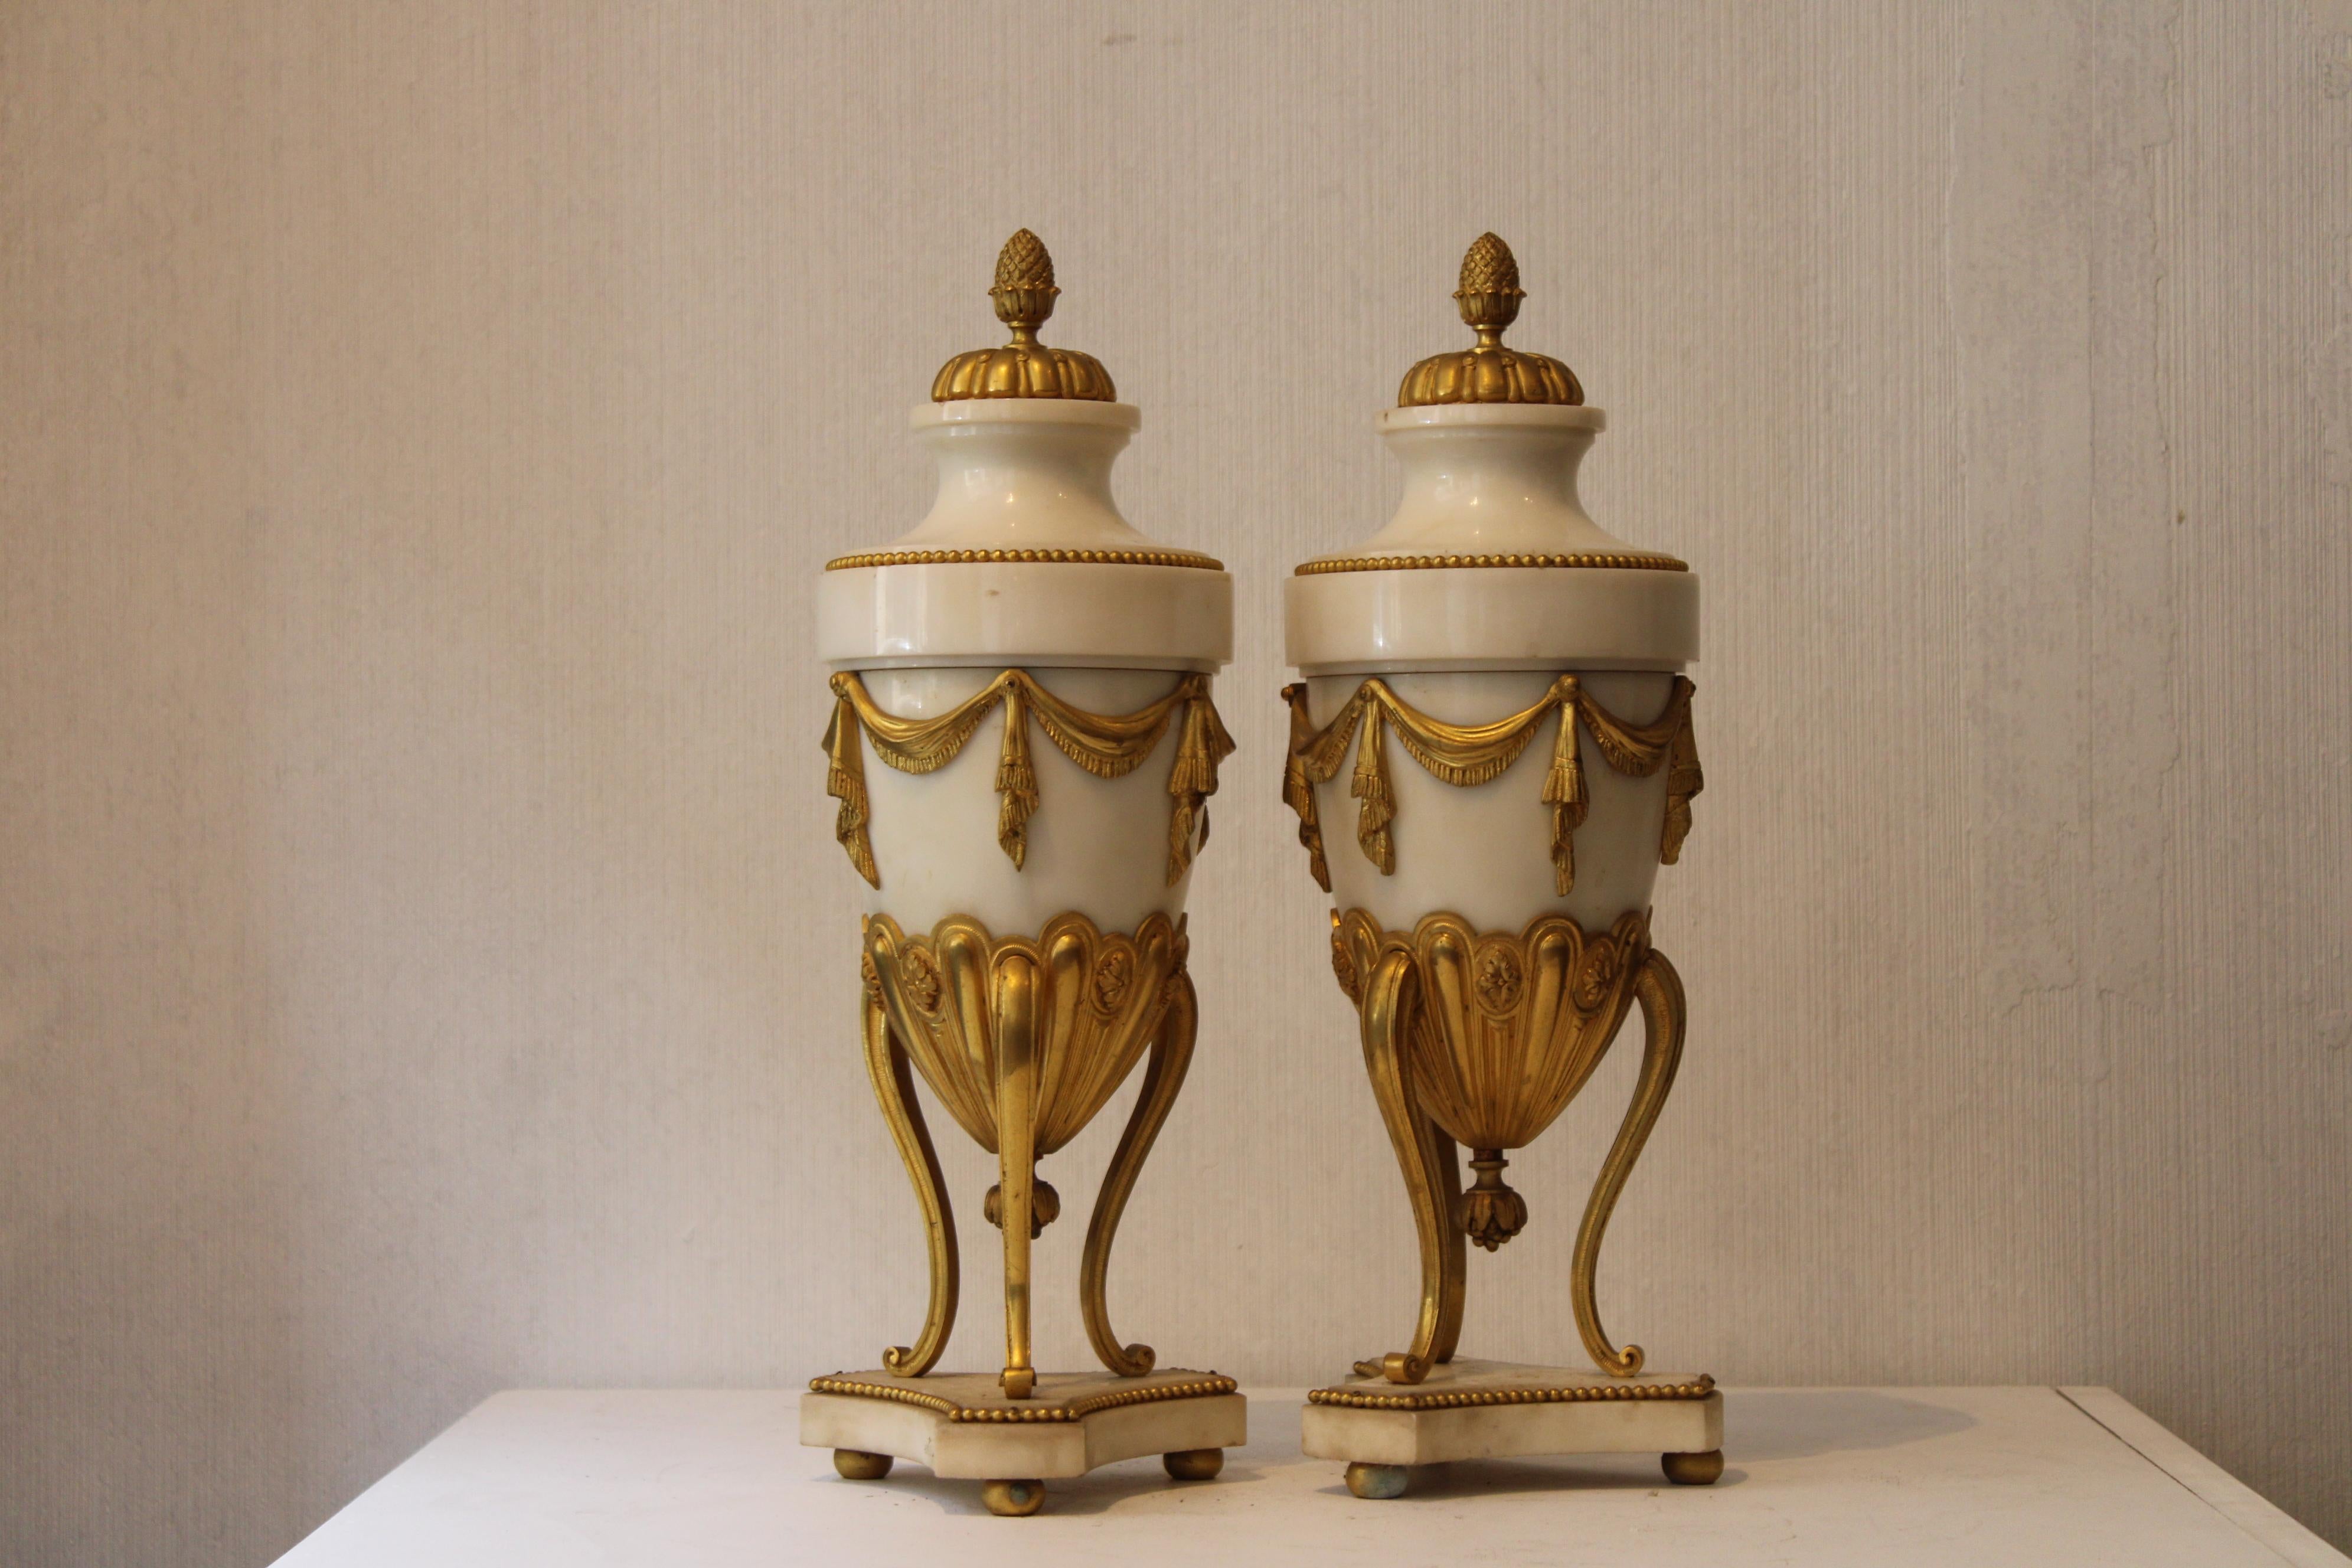 Pair of Cassolettes from the 19th century. Marble and gilded bronze, in the style of Louis XVI